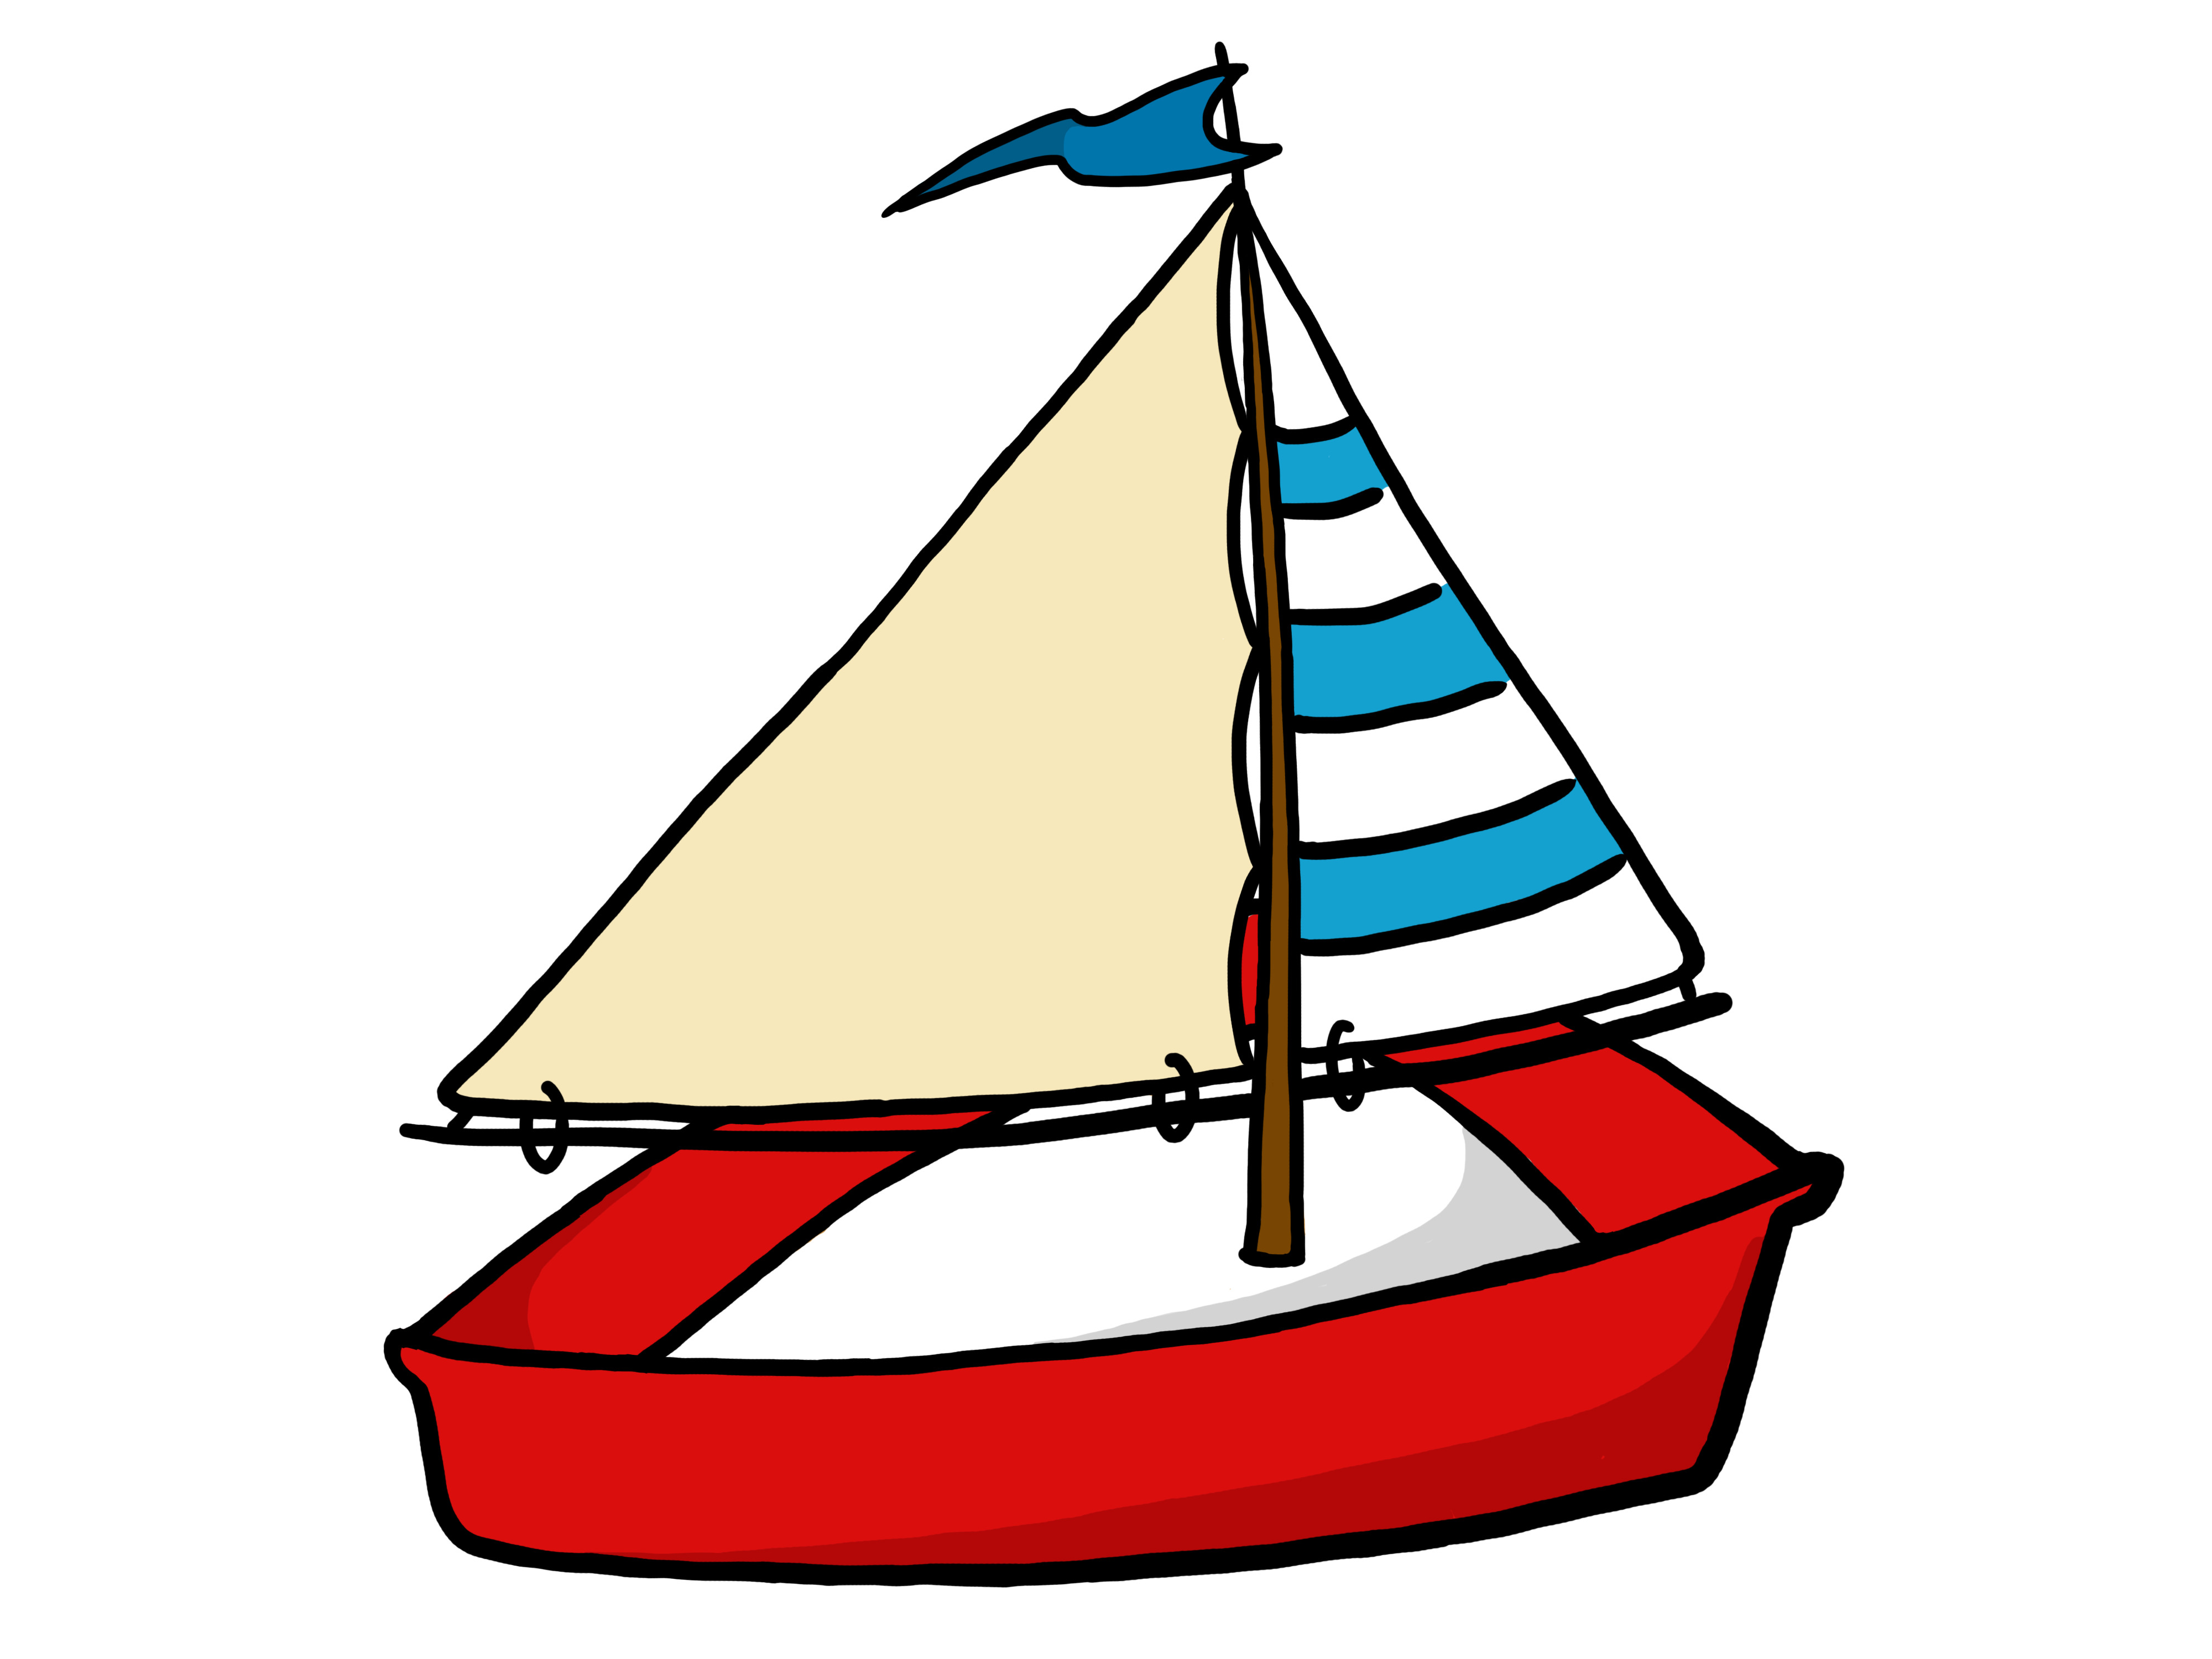 Boating panda free images. Clipart boat easy